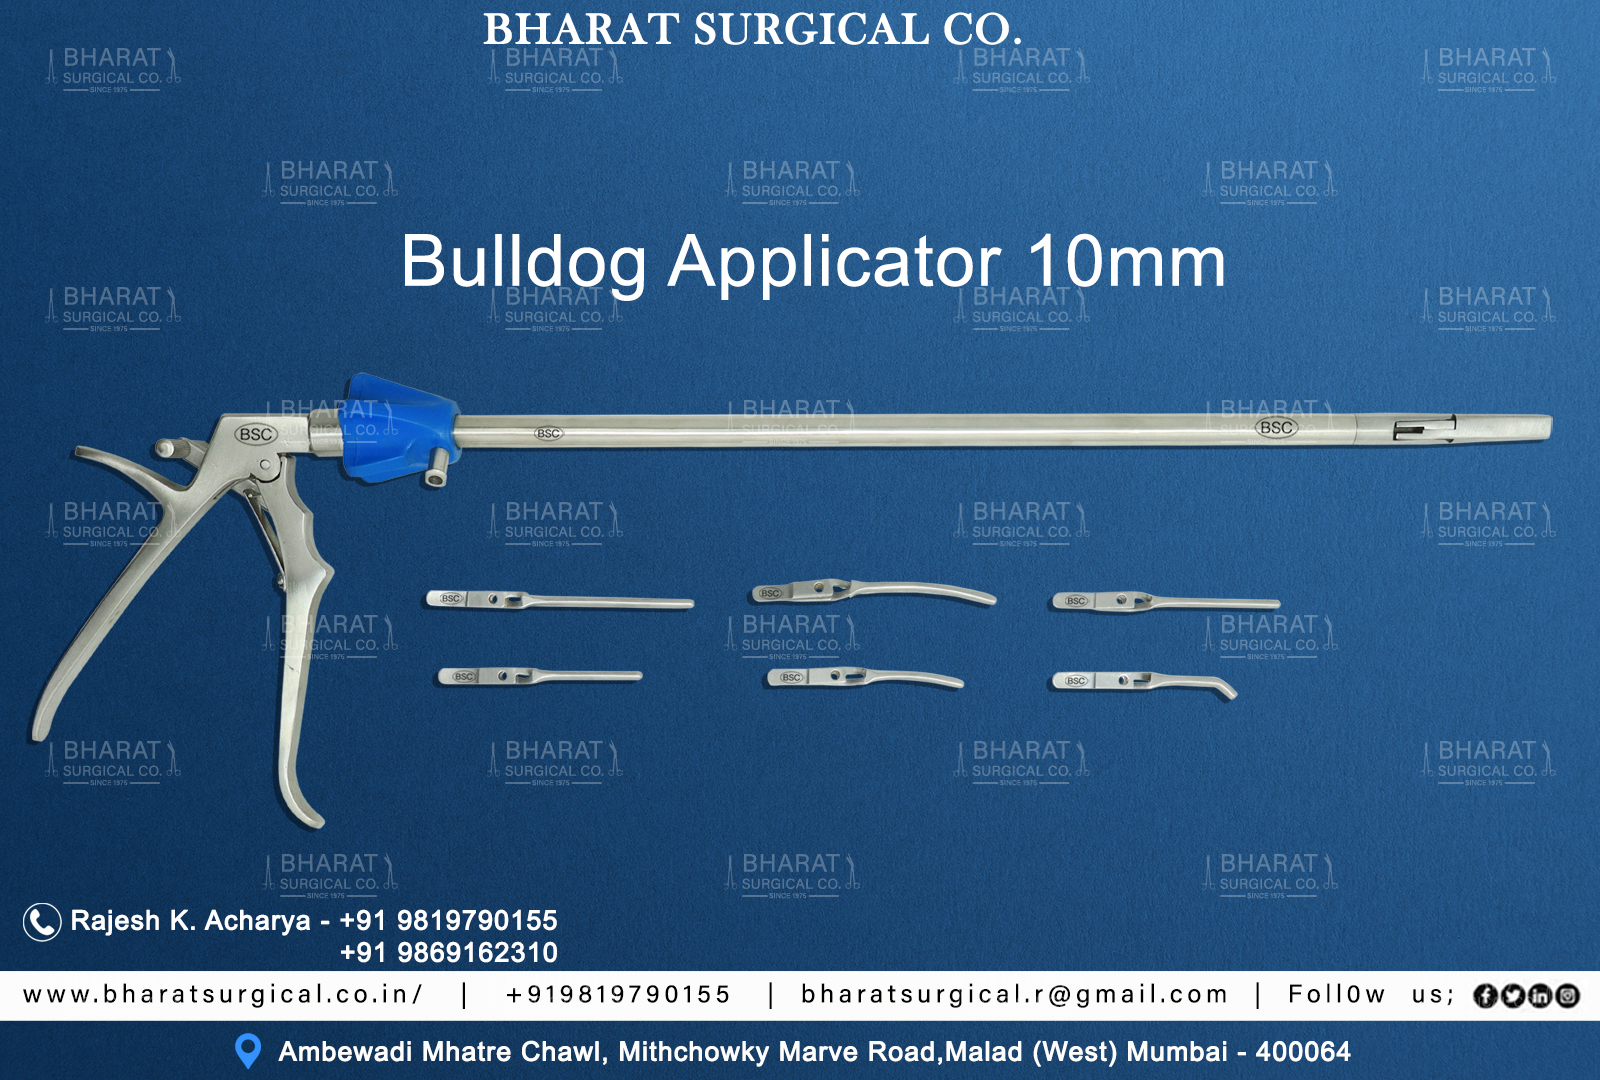 Bull Dog Clip Applicator 10mm manufacturers, suppliers and exporters.